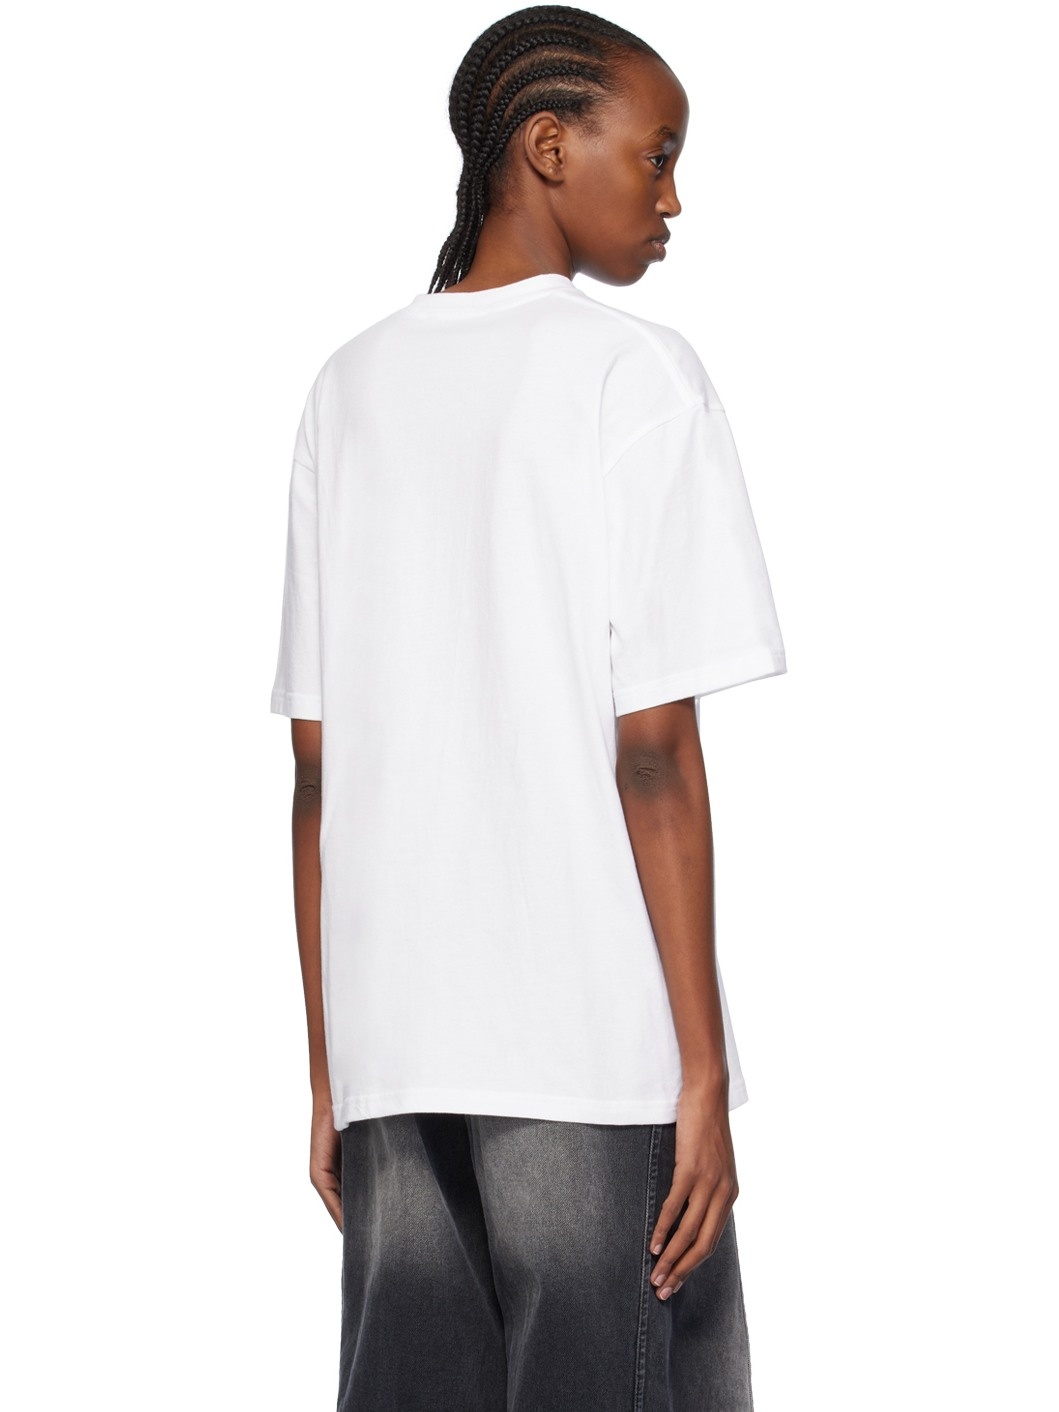 SSENSE Exclusive White Soulful Crying Girl T-Shirt - 3